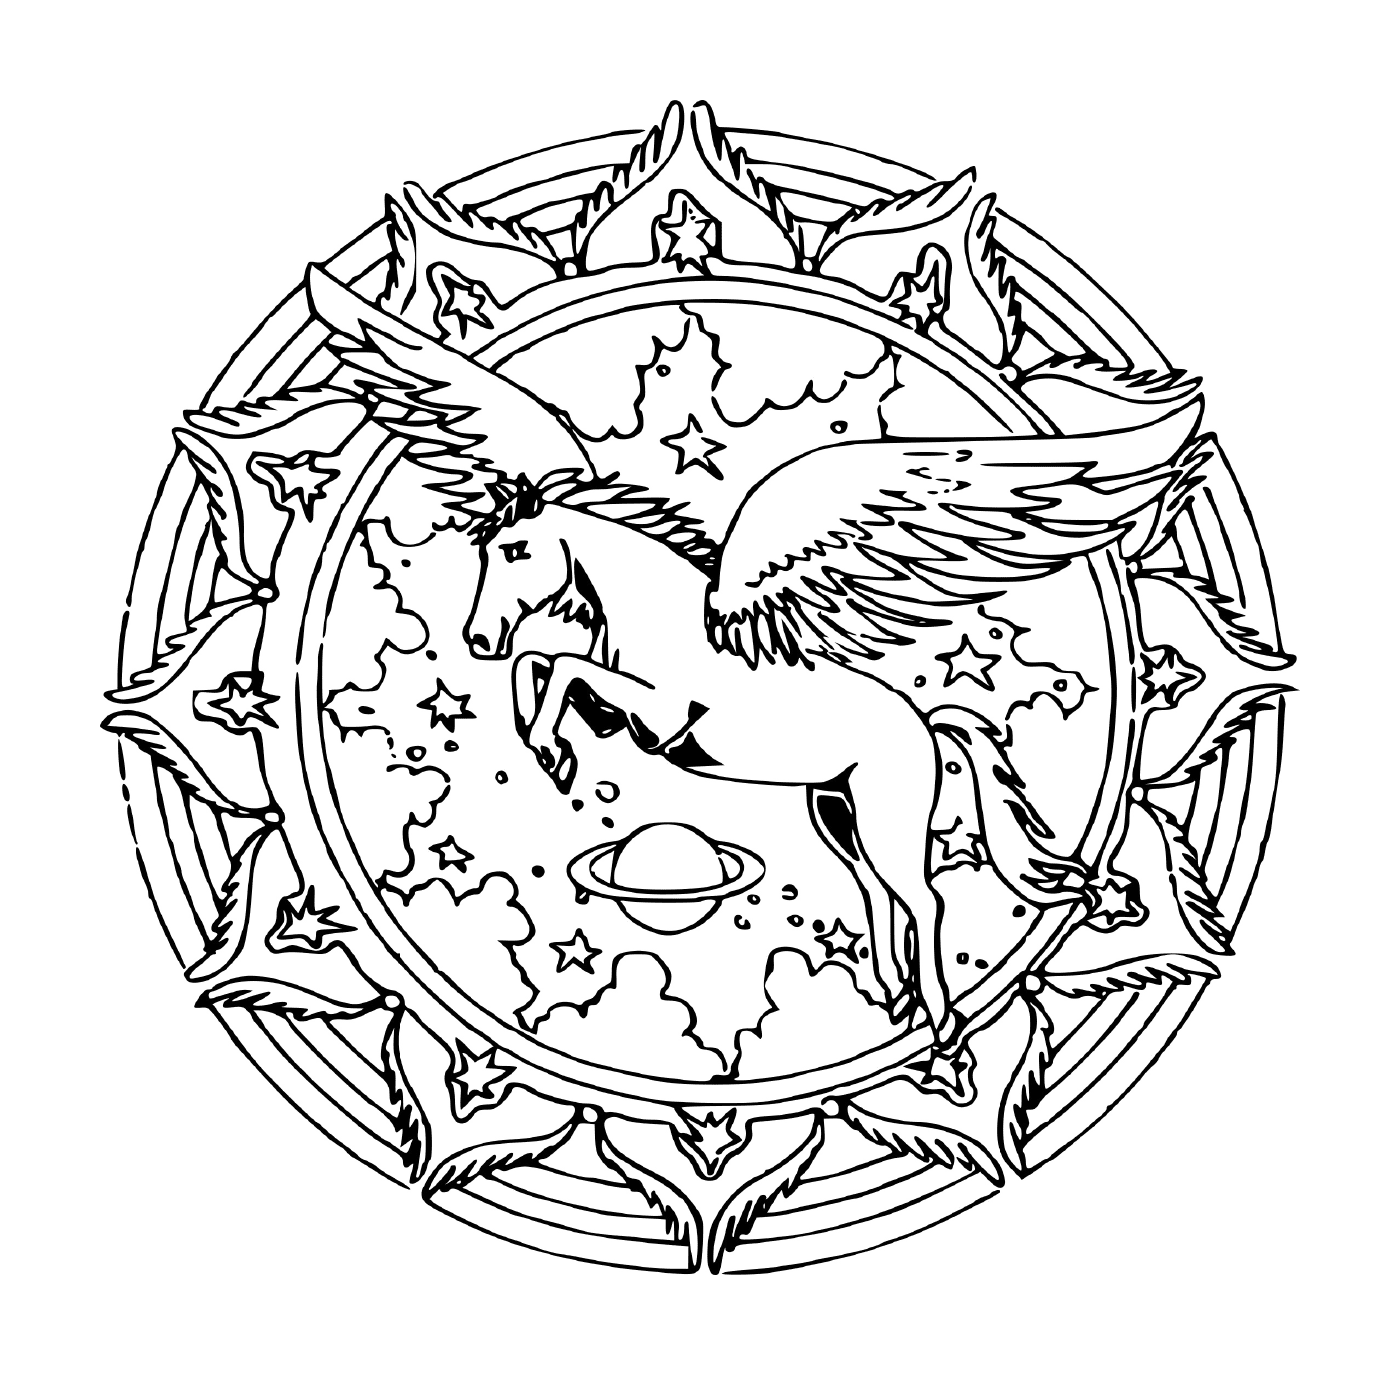  Unicorn with celestial wings 